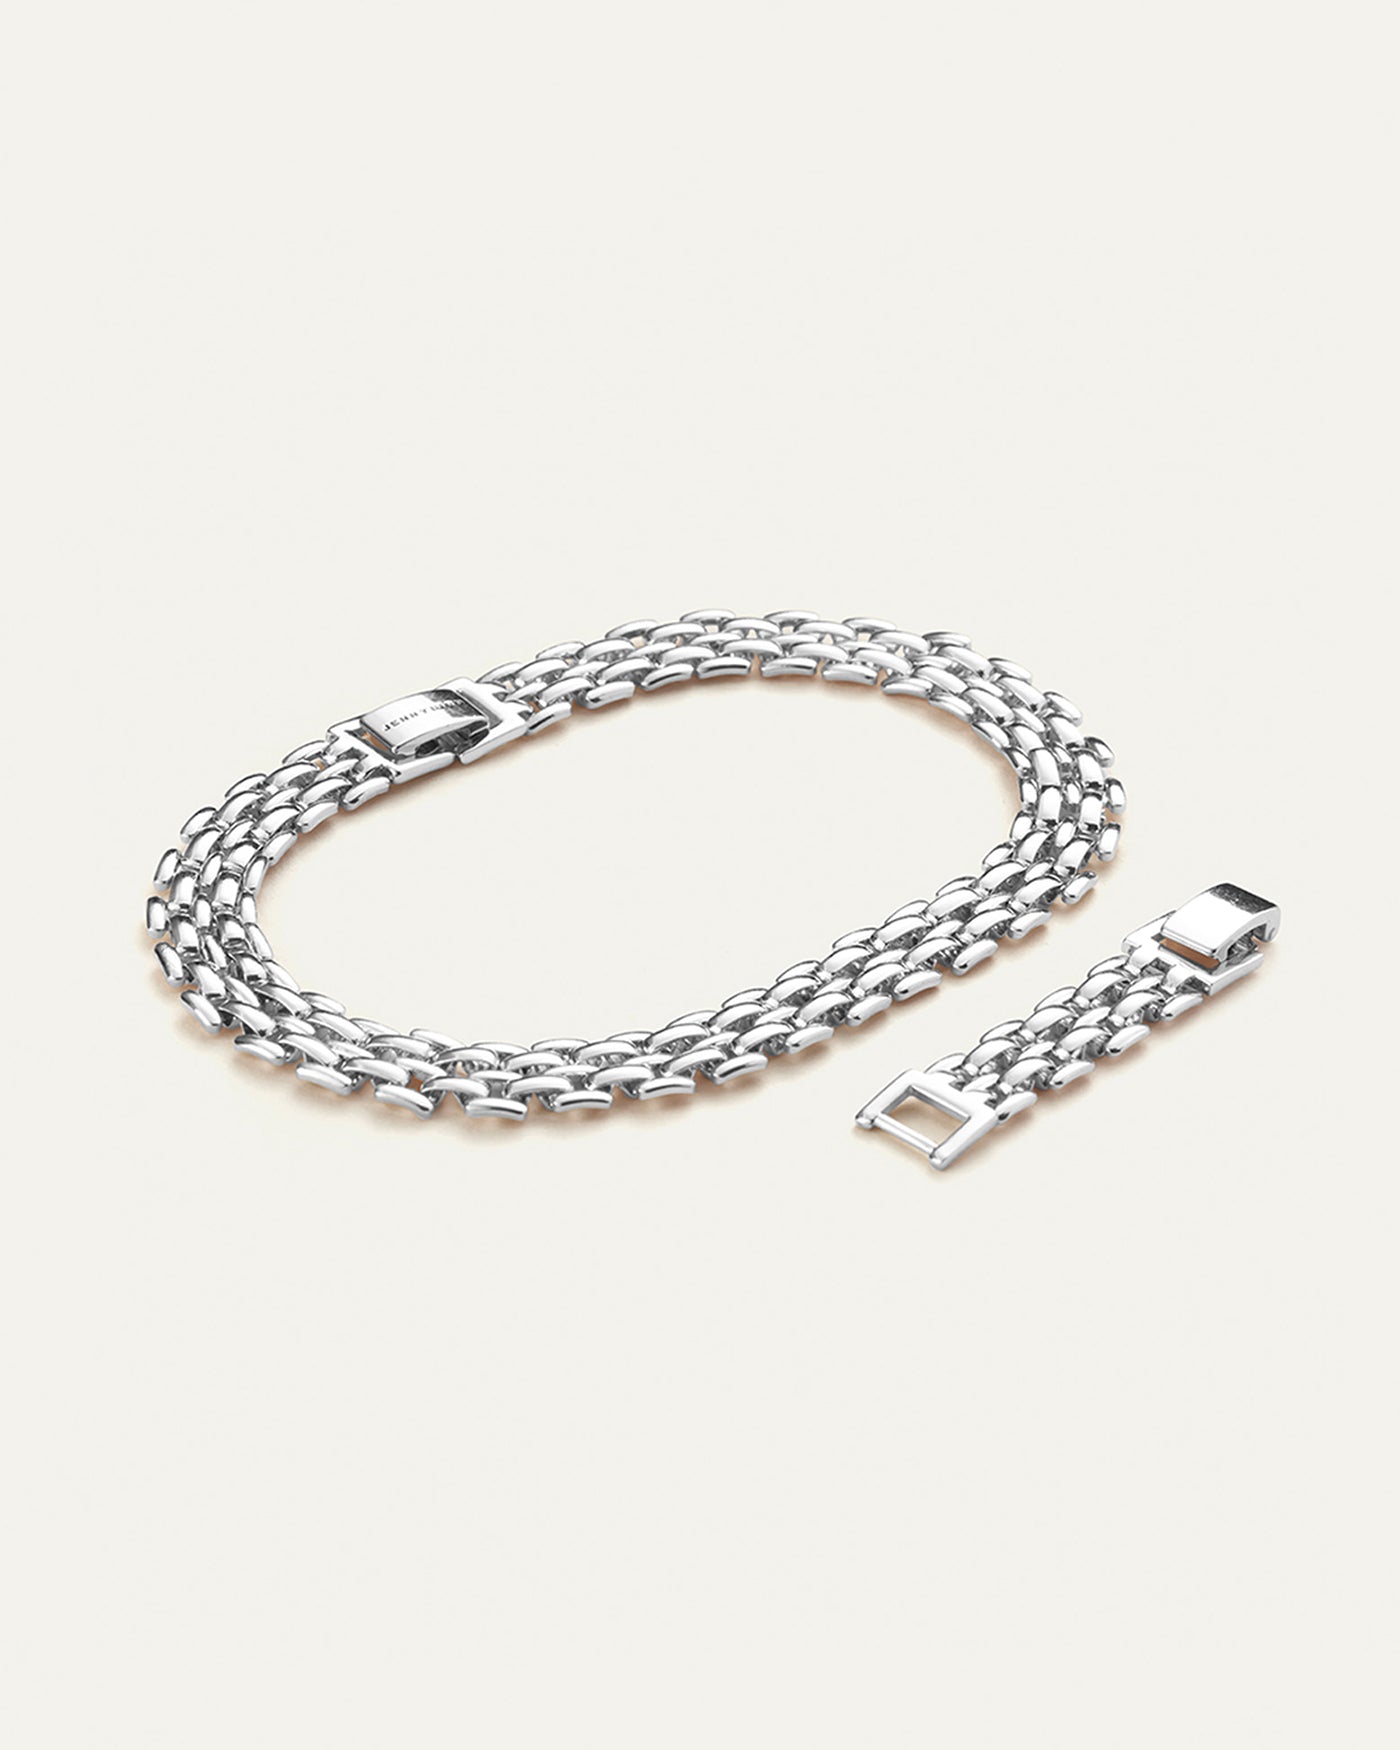 HotWife Bracelet (or anklet) in Stainless Steel with gift bag included